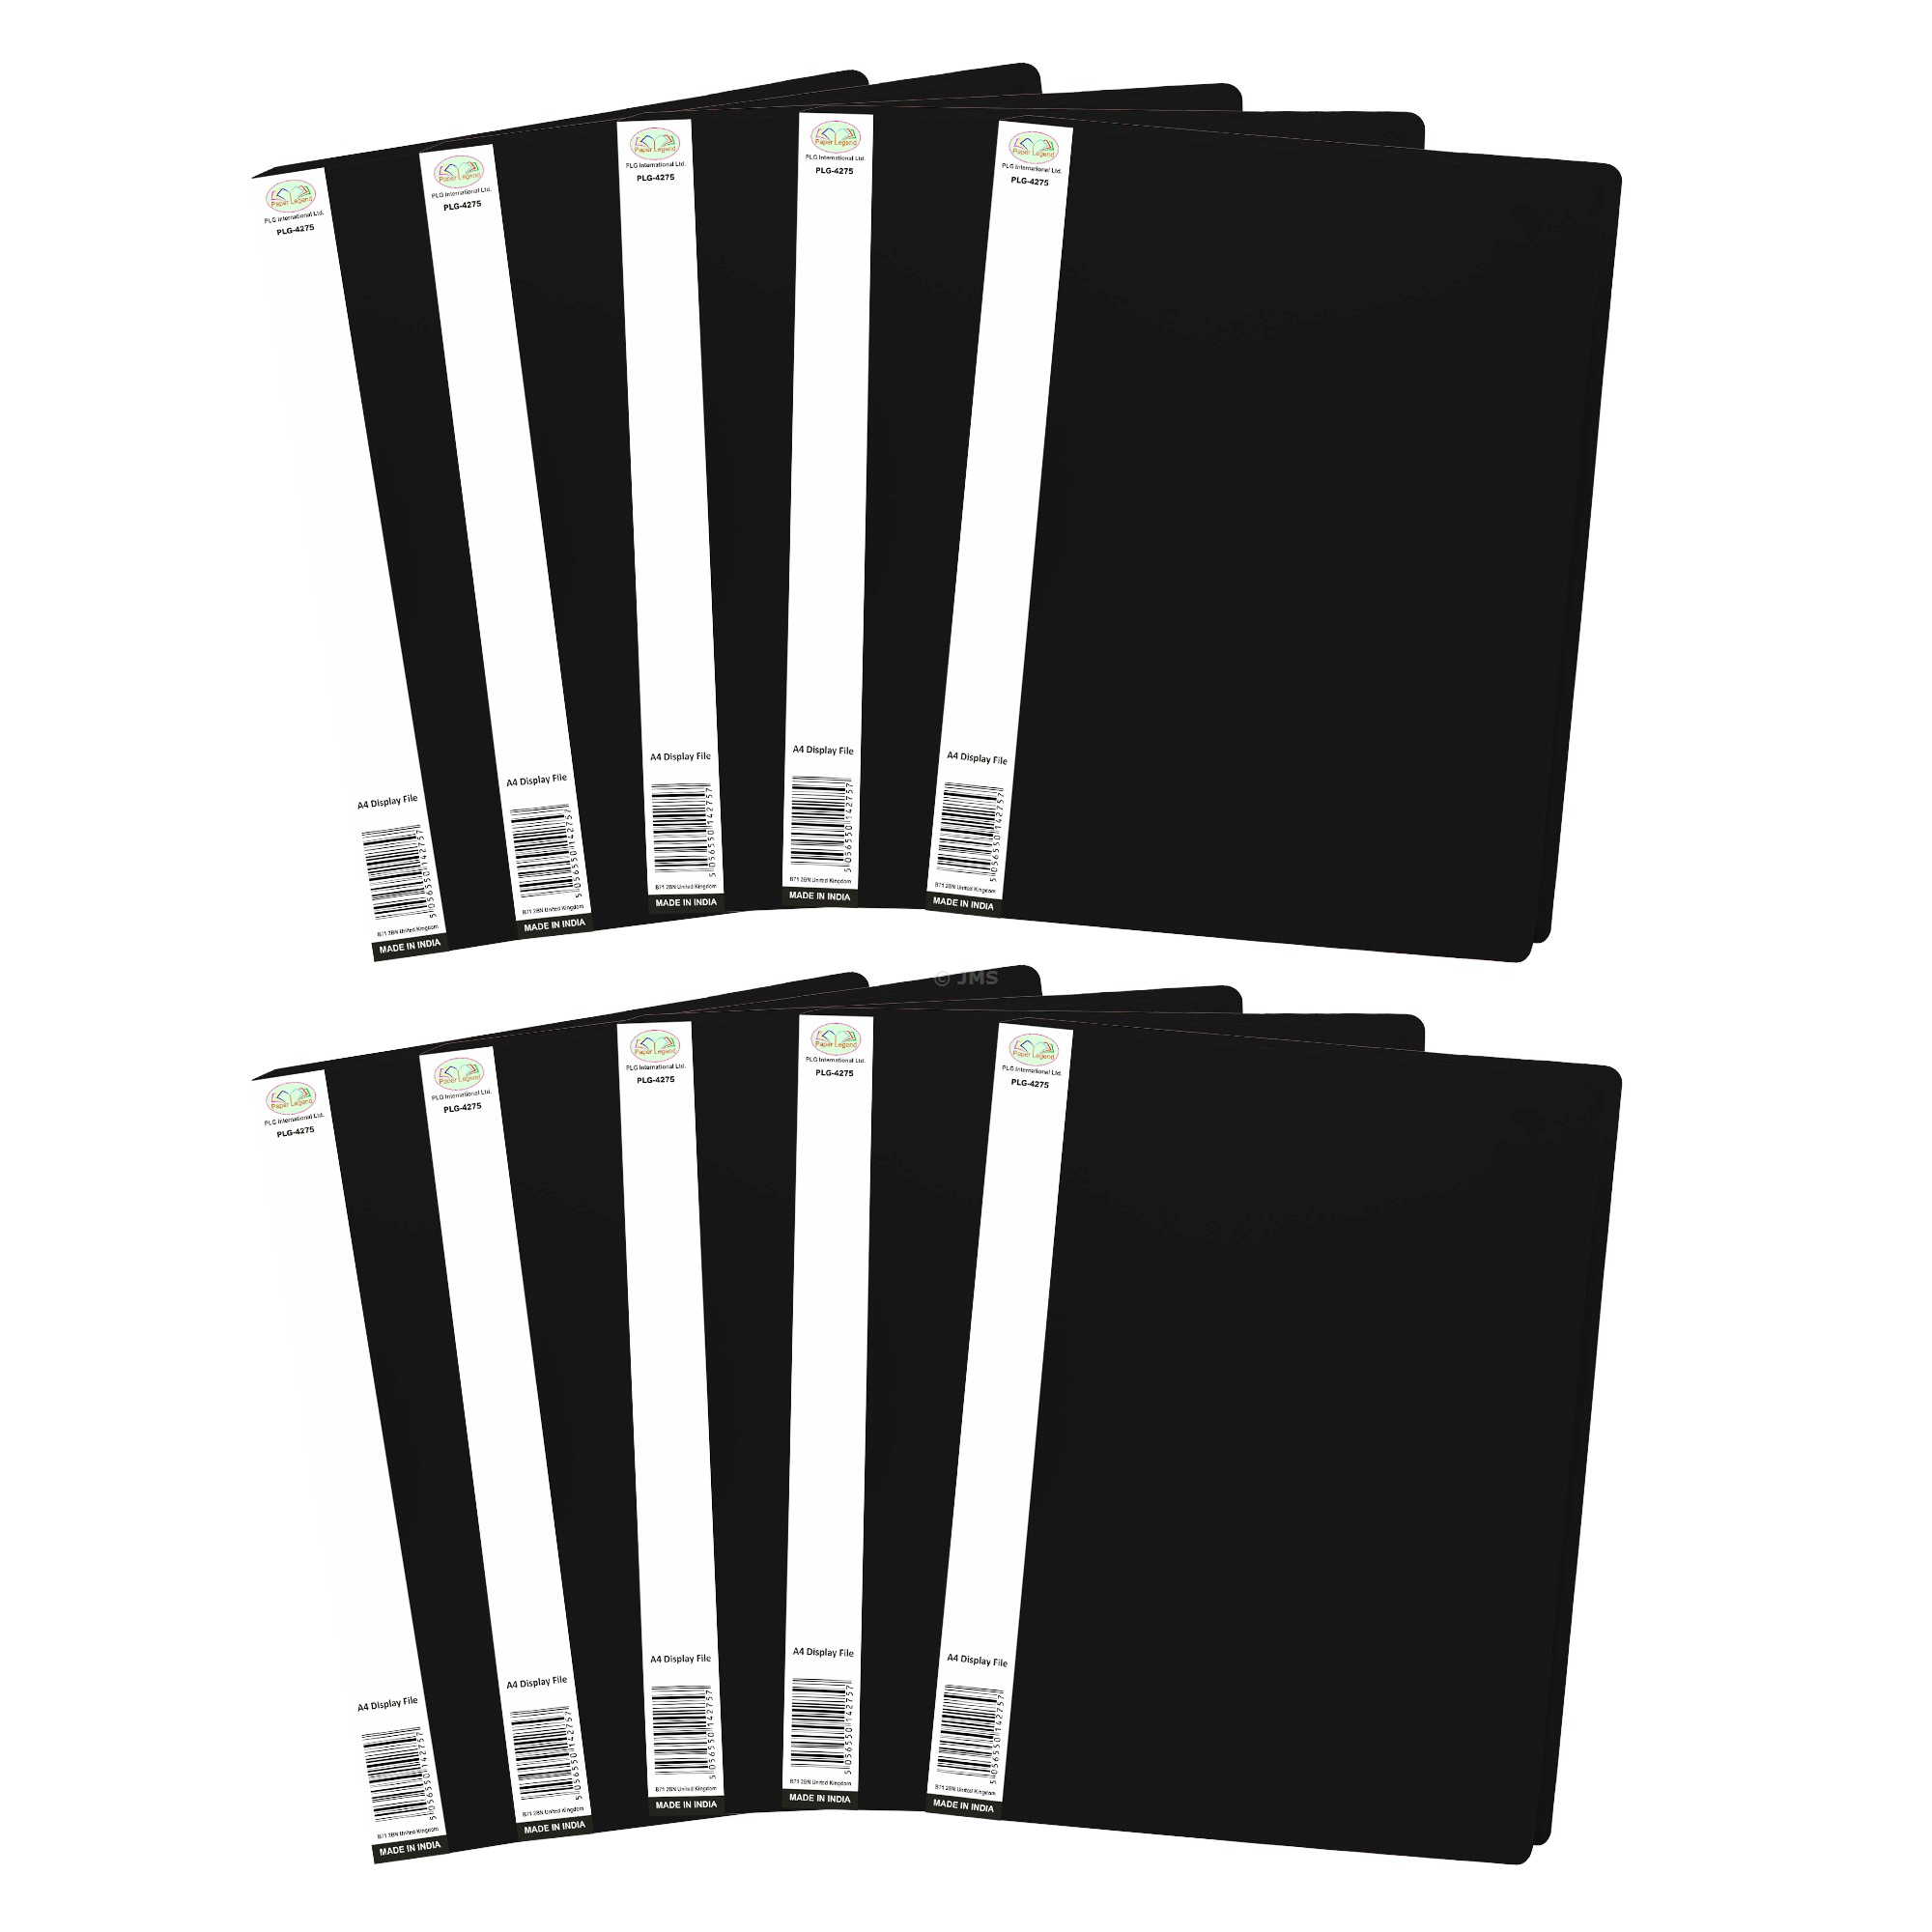 (Pack of 10) A4 Display Folders 20 Pockets/ 40 View Pages Black Display Book with Plastic Sleeves Certificate Size Document Folders Portfolio Presentation Project File Folders for Office,Home,School